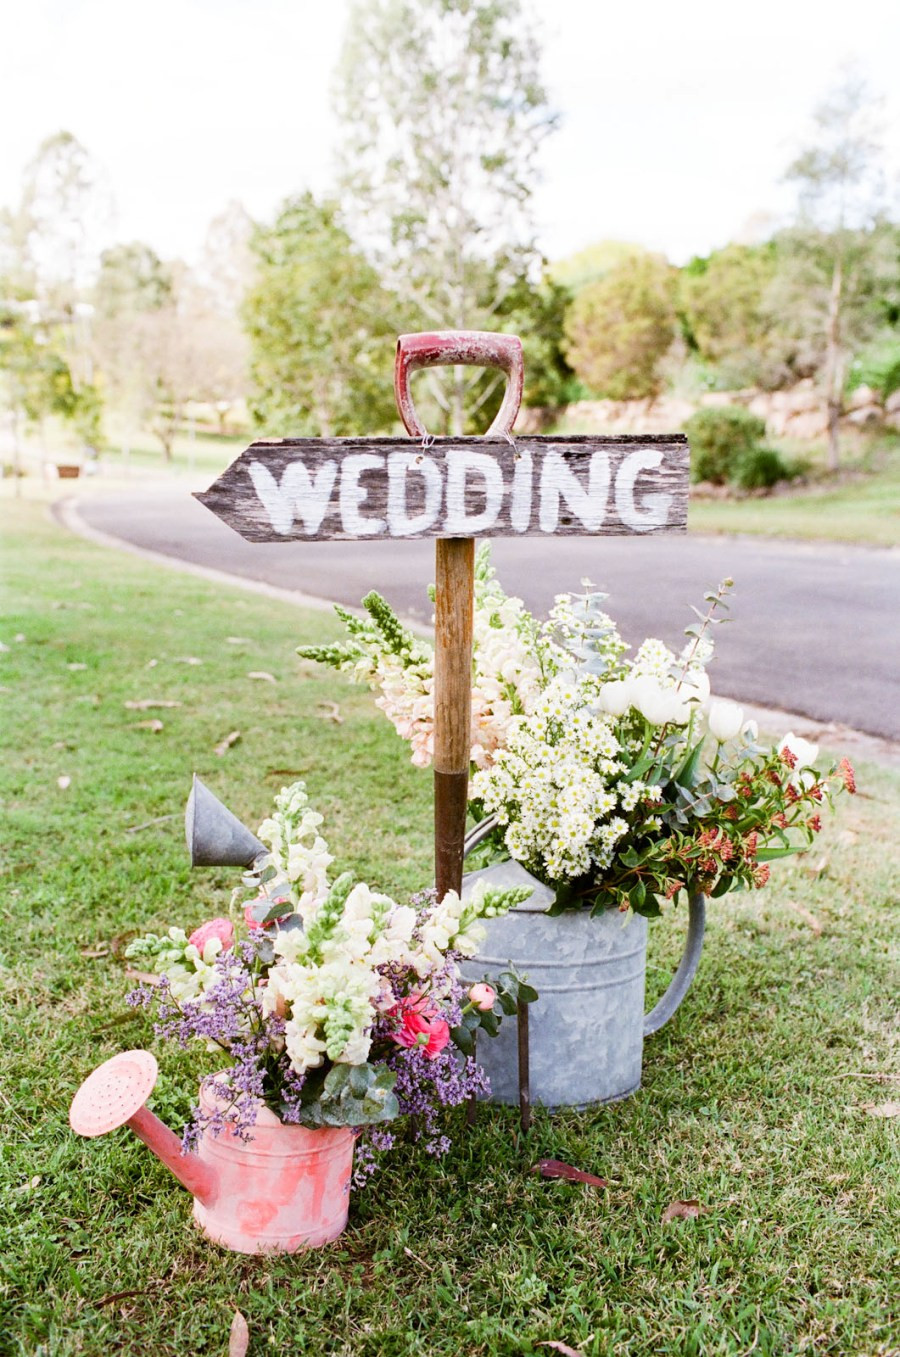 Country Weddings Decorations
 Say “I Do” to These Fab 51 Rustic Wedding Decorations